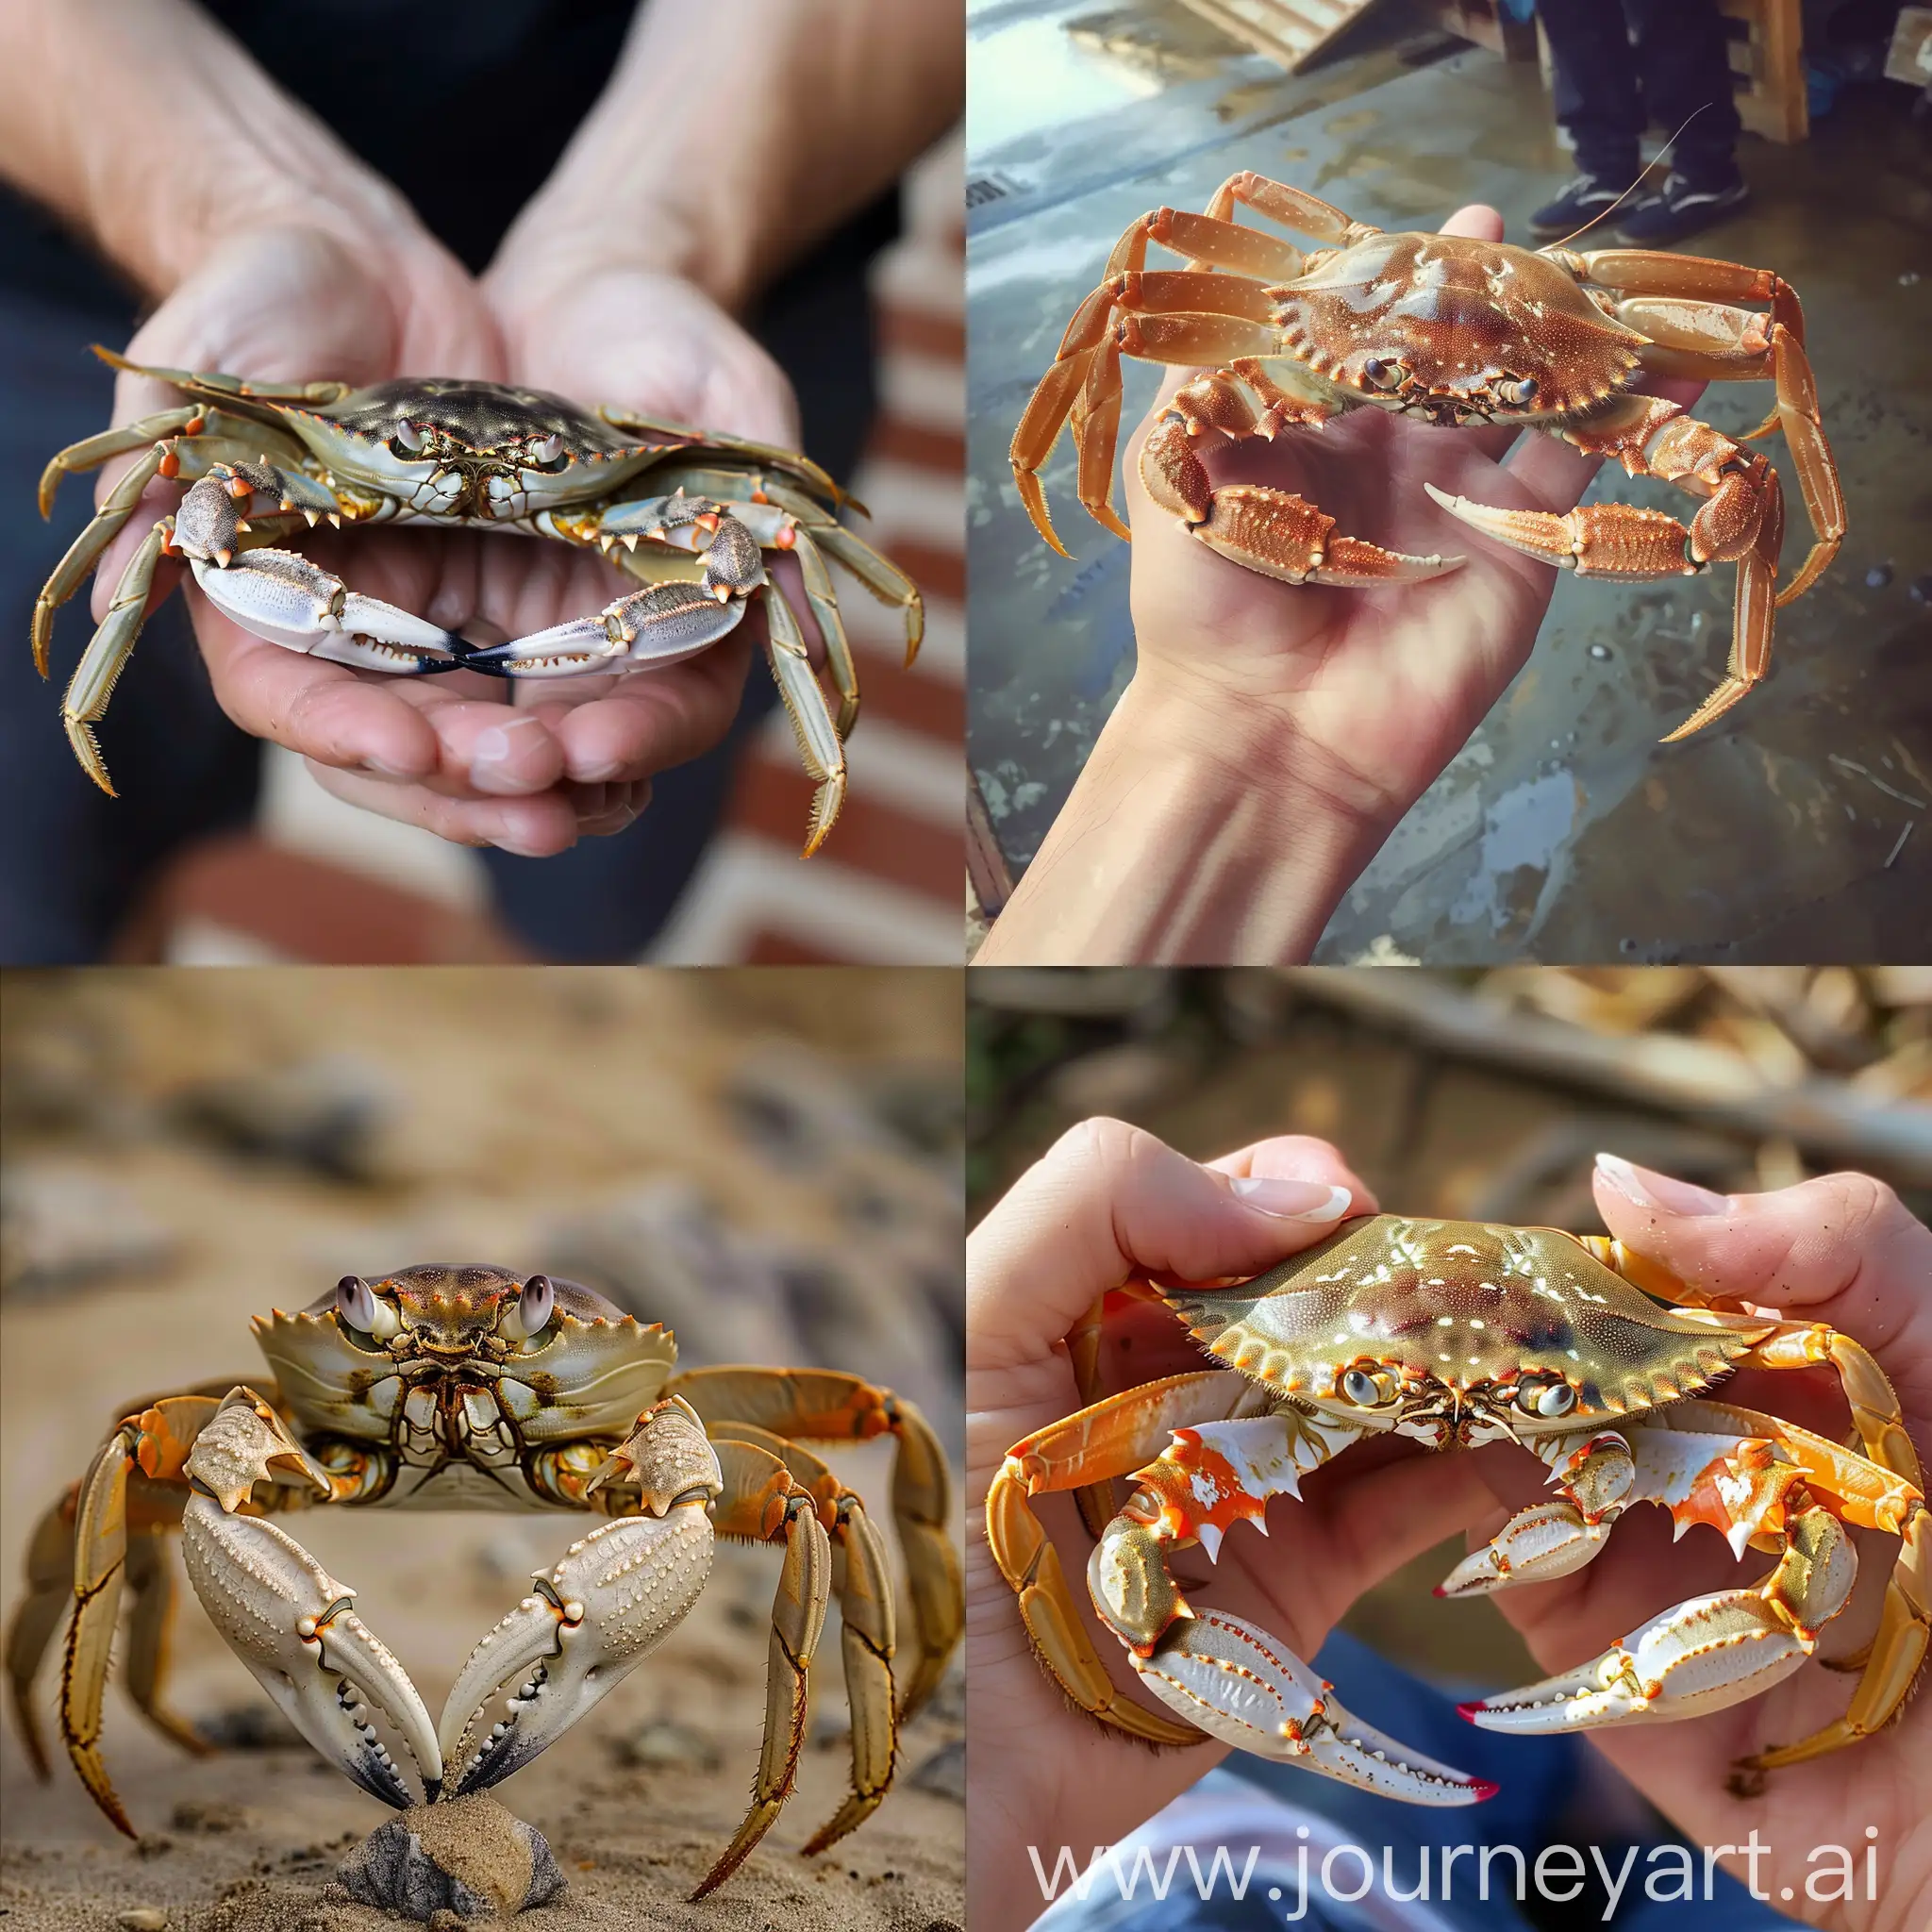 Courier-Delivering-Live-Crab-Vibrant-Scene-with-Express-Delivery